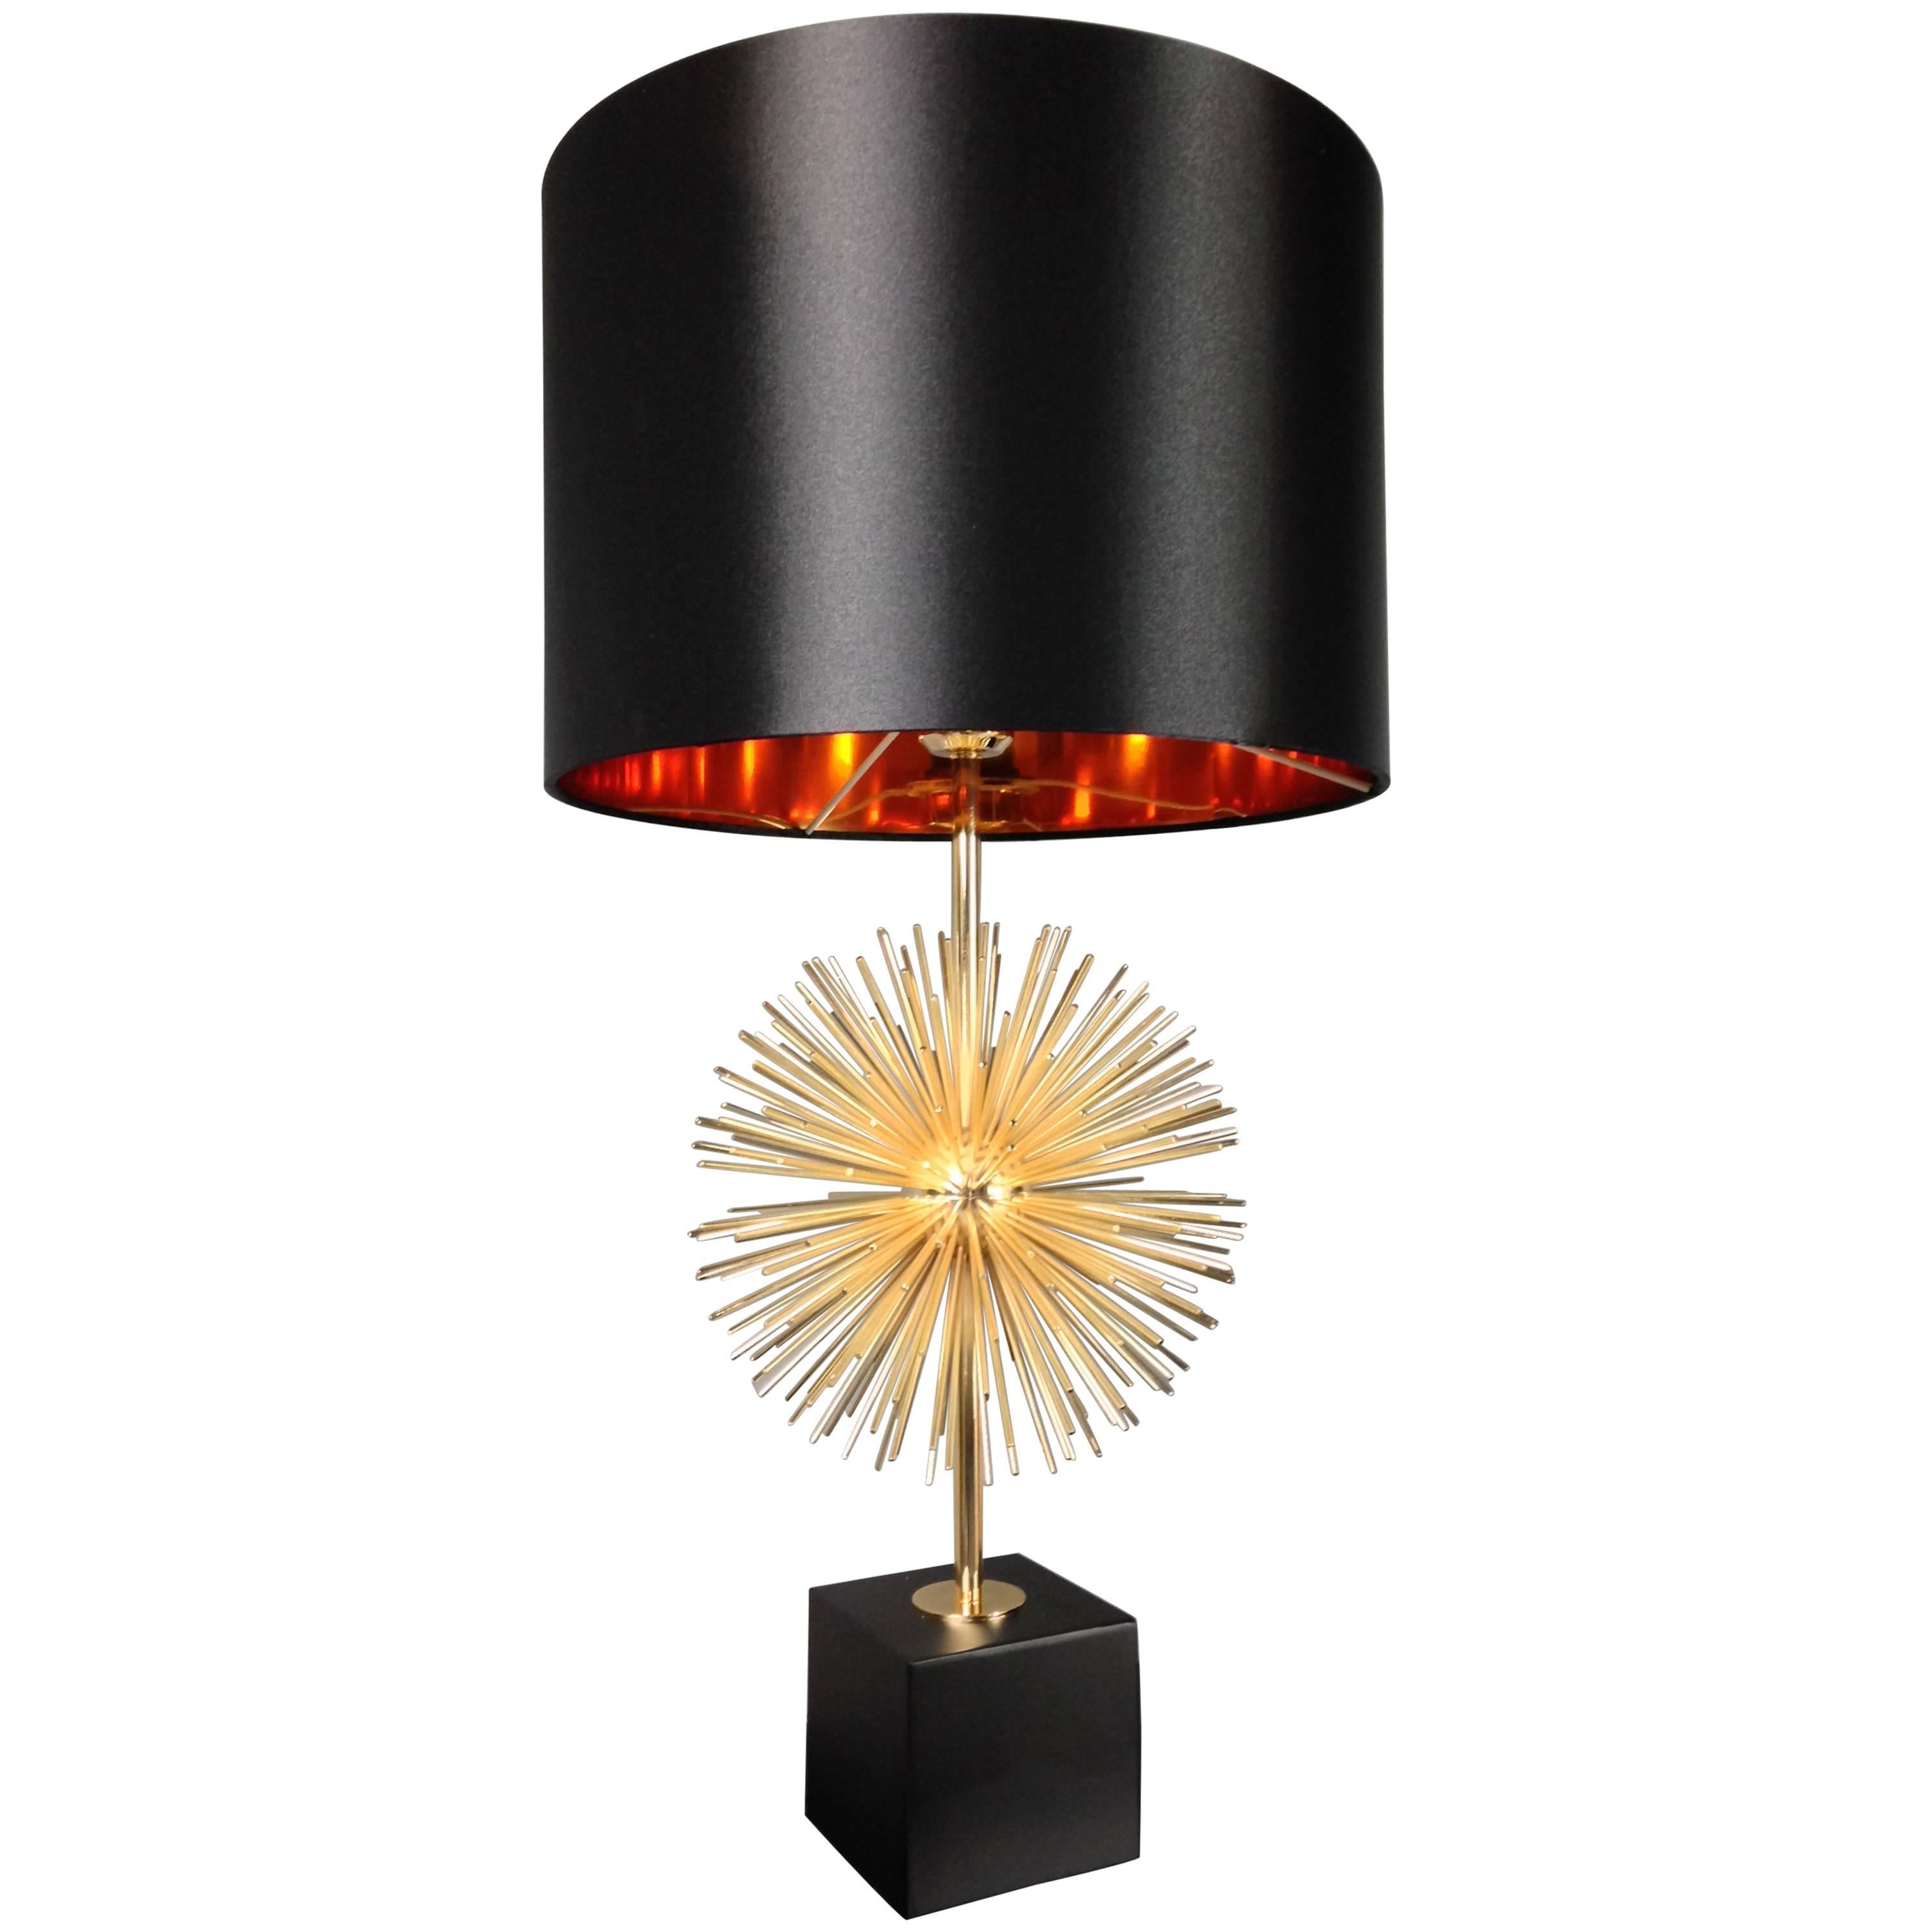 Brass metal and black shade table lamp

Measures: Diameter of the sputnik 25 cm (10 inches).